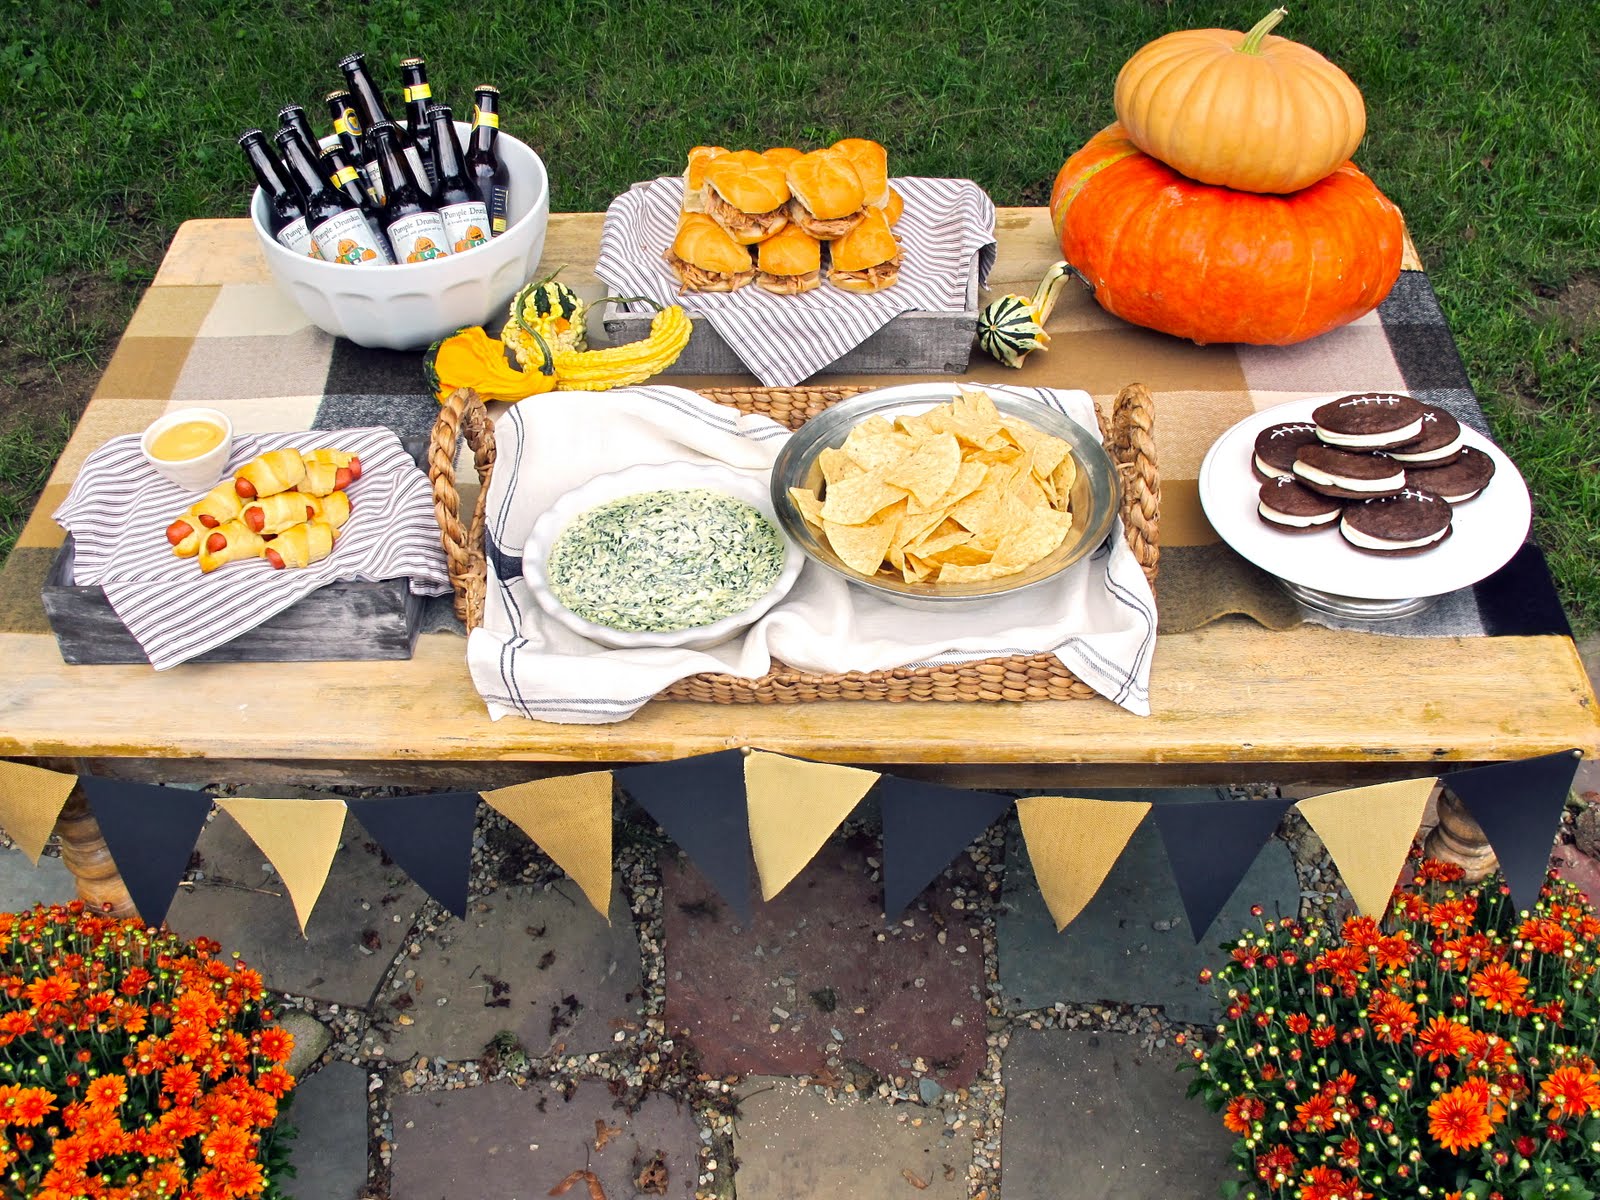 Jenny Steffens Hobick: Game Day! Tailgate Party Recipes & Decor Ideas